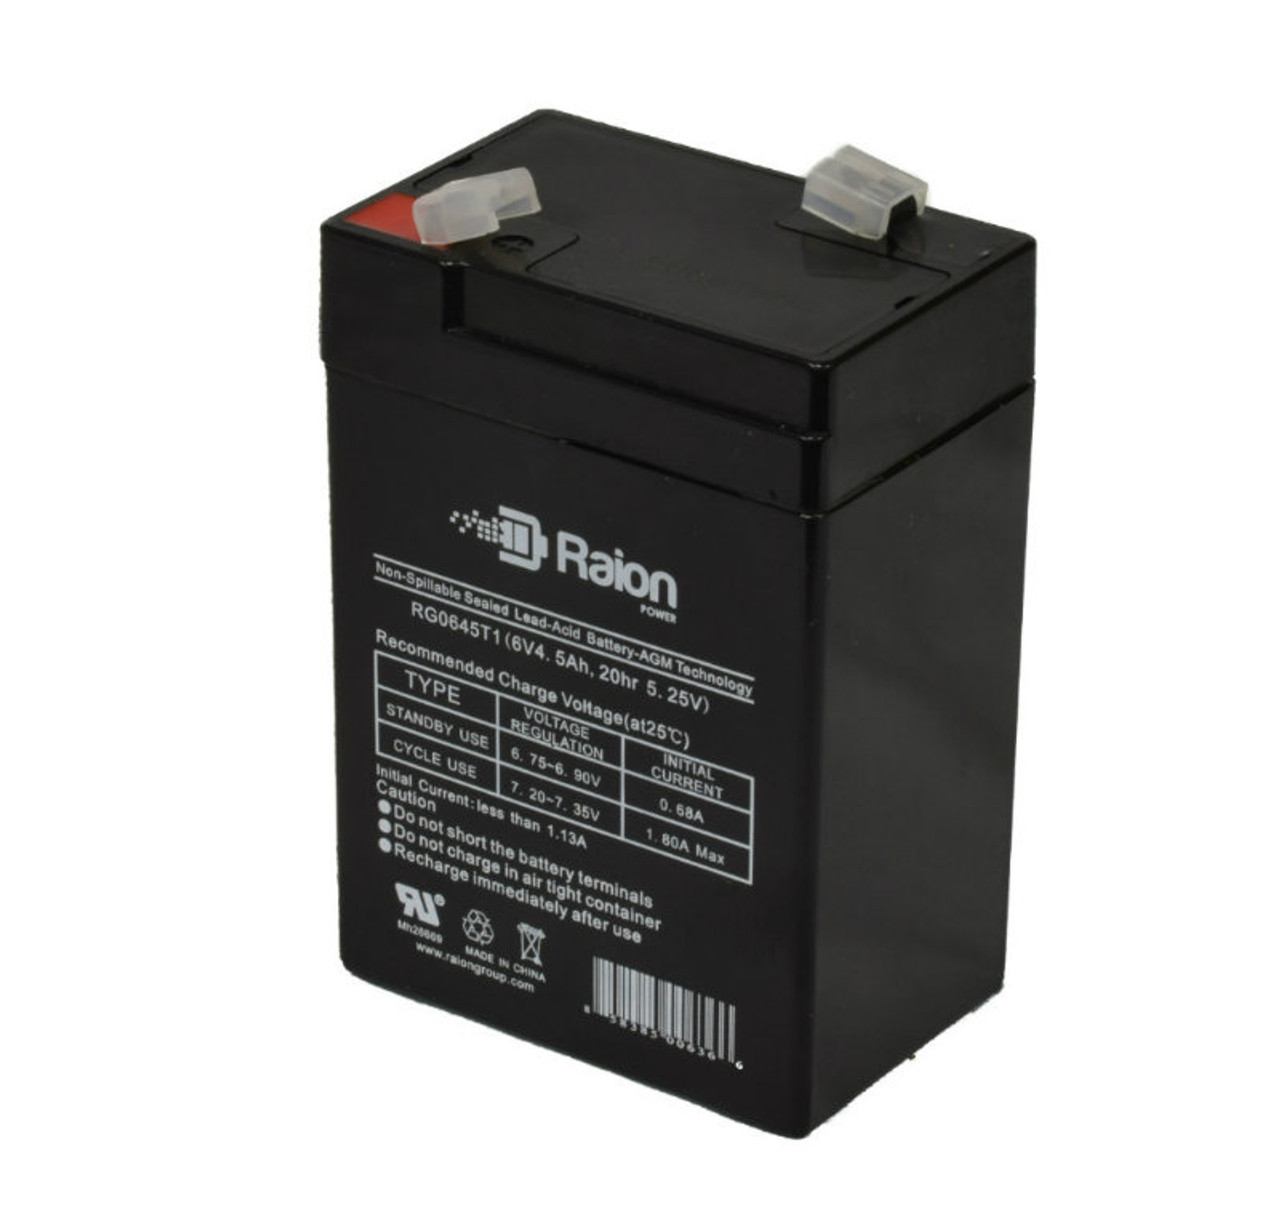 Raion Power RG0645T1 6V 4.5Ah Replacement Battery Cartridge for Light Alarms 6600004